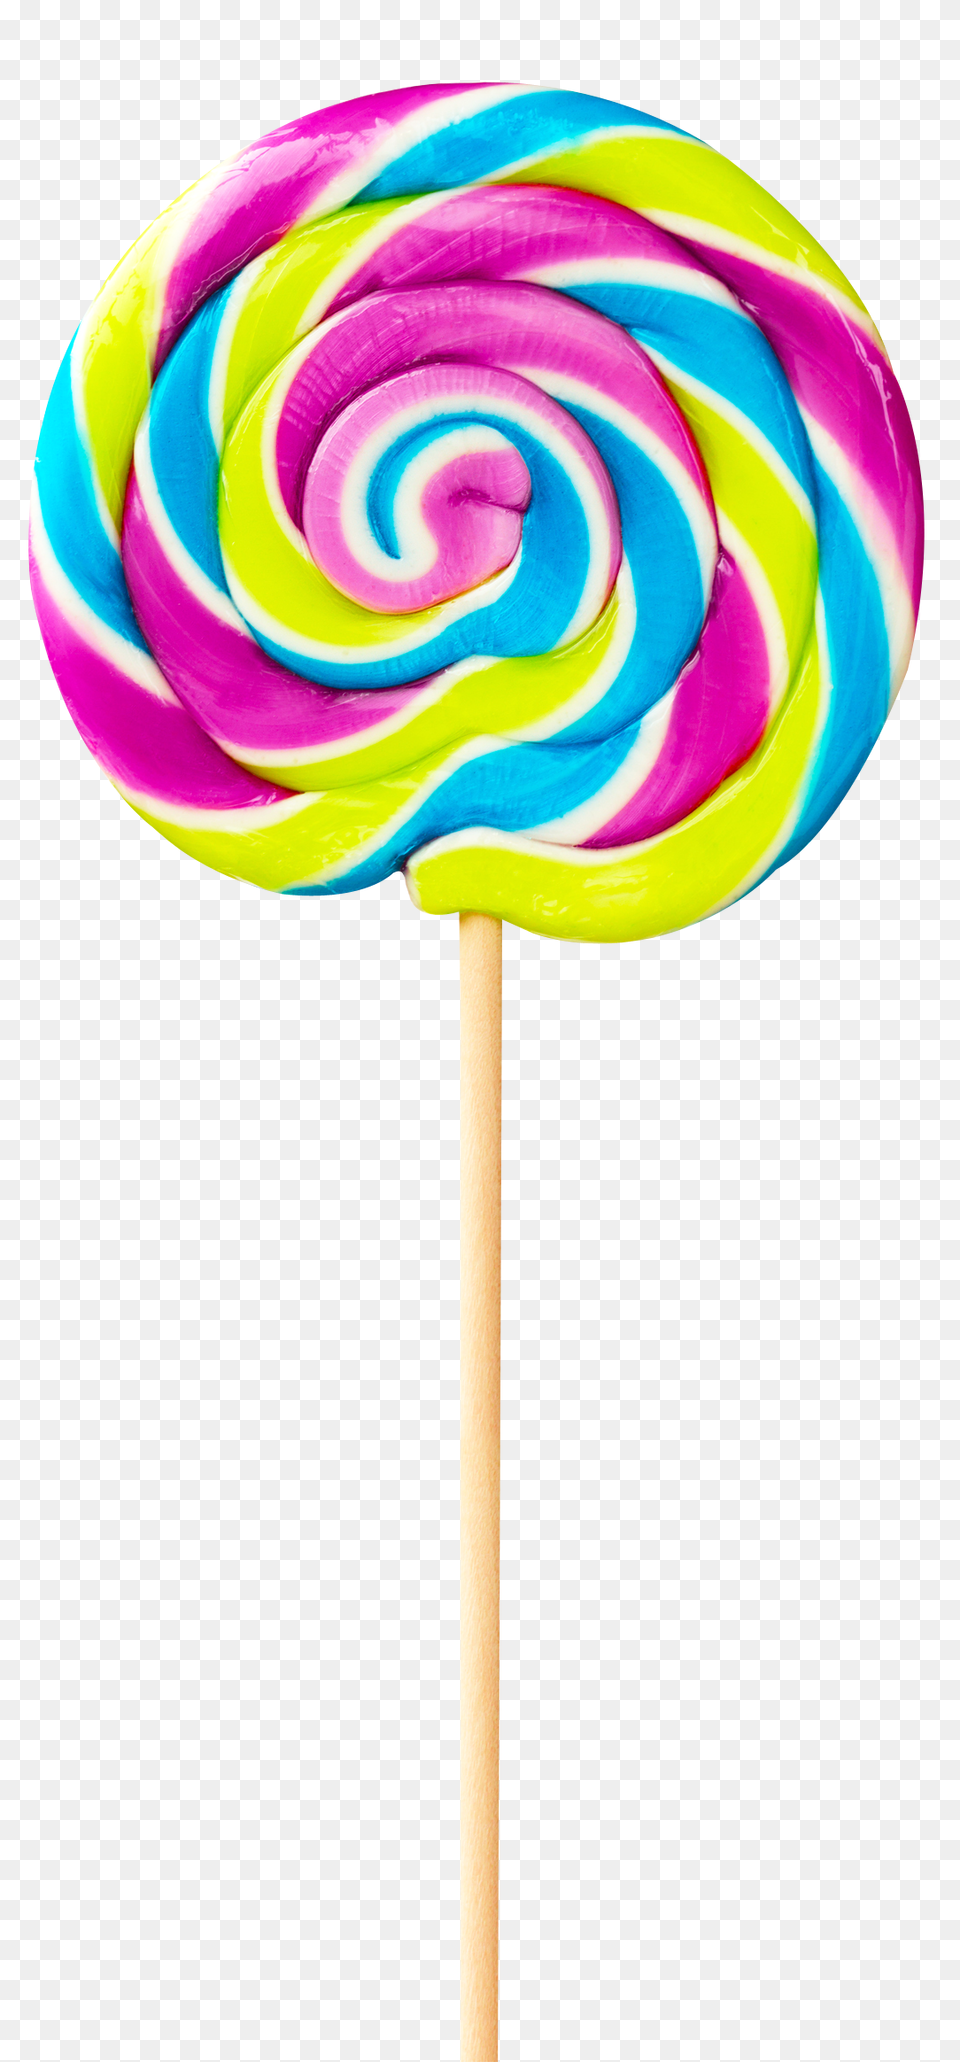 Lollipop Candy, Food, Sweets Png Image